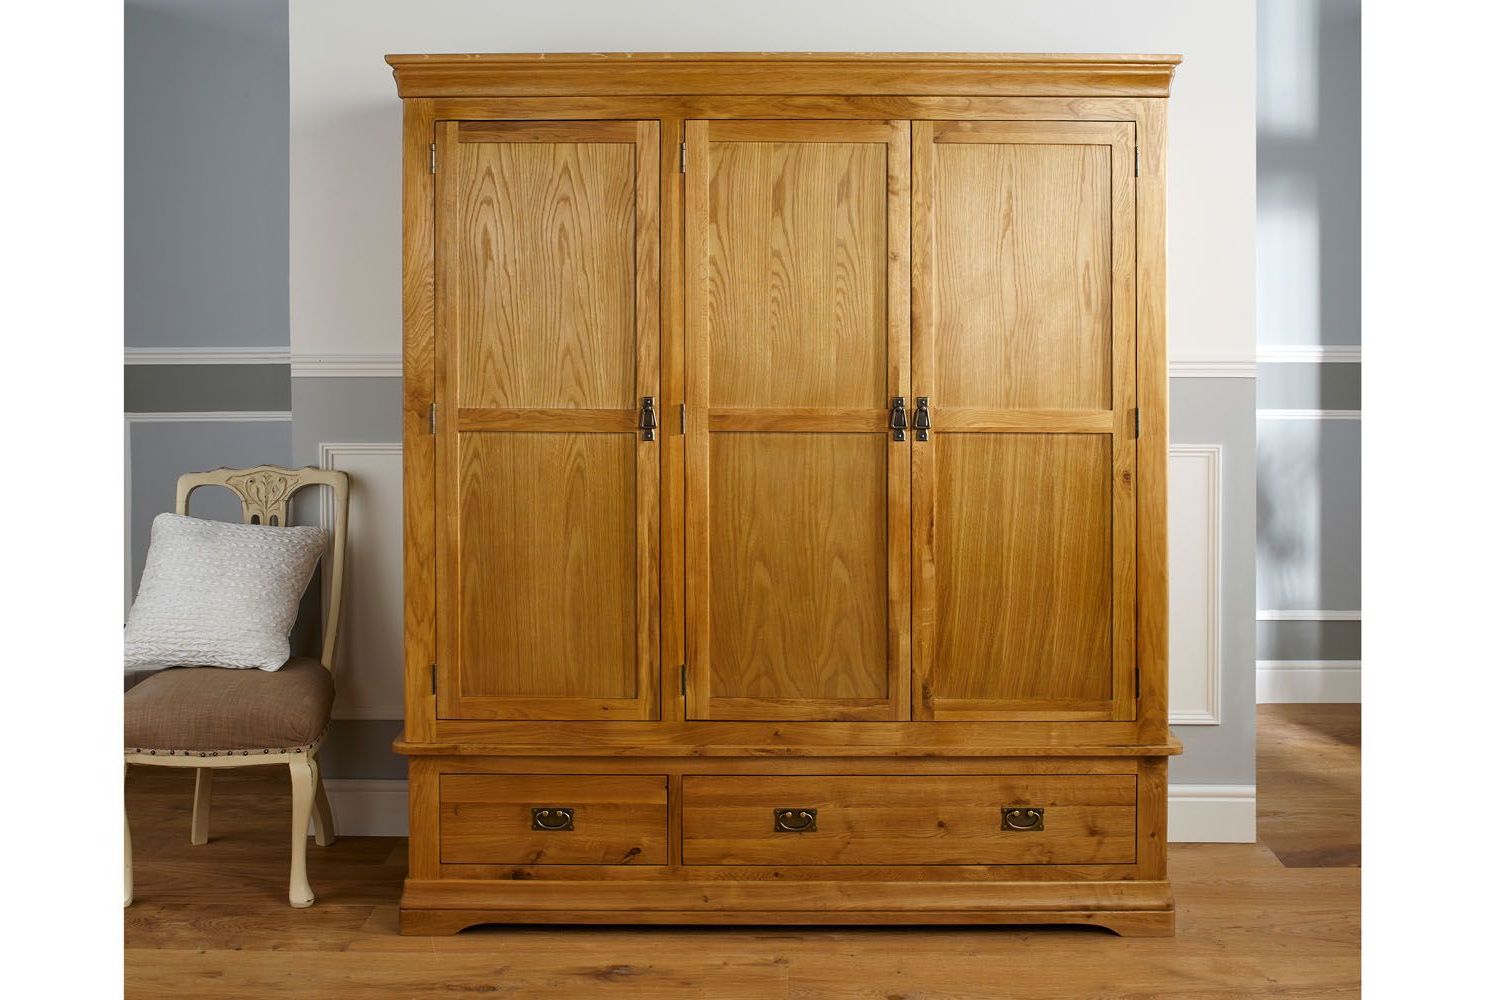 French Farmhouse Large Triple Oak Wardrobe – Free Delivery | Top Furniture With Regard To Triple Oak Wardrobes (Gallery 4 of 20)